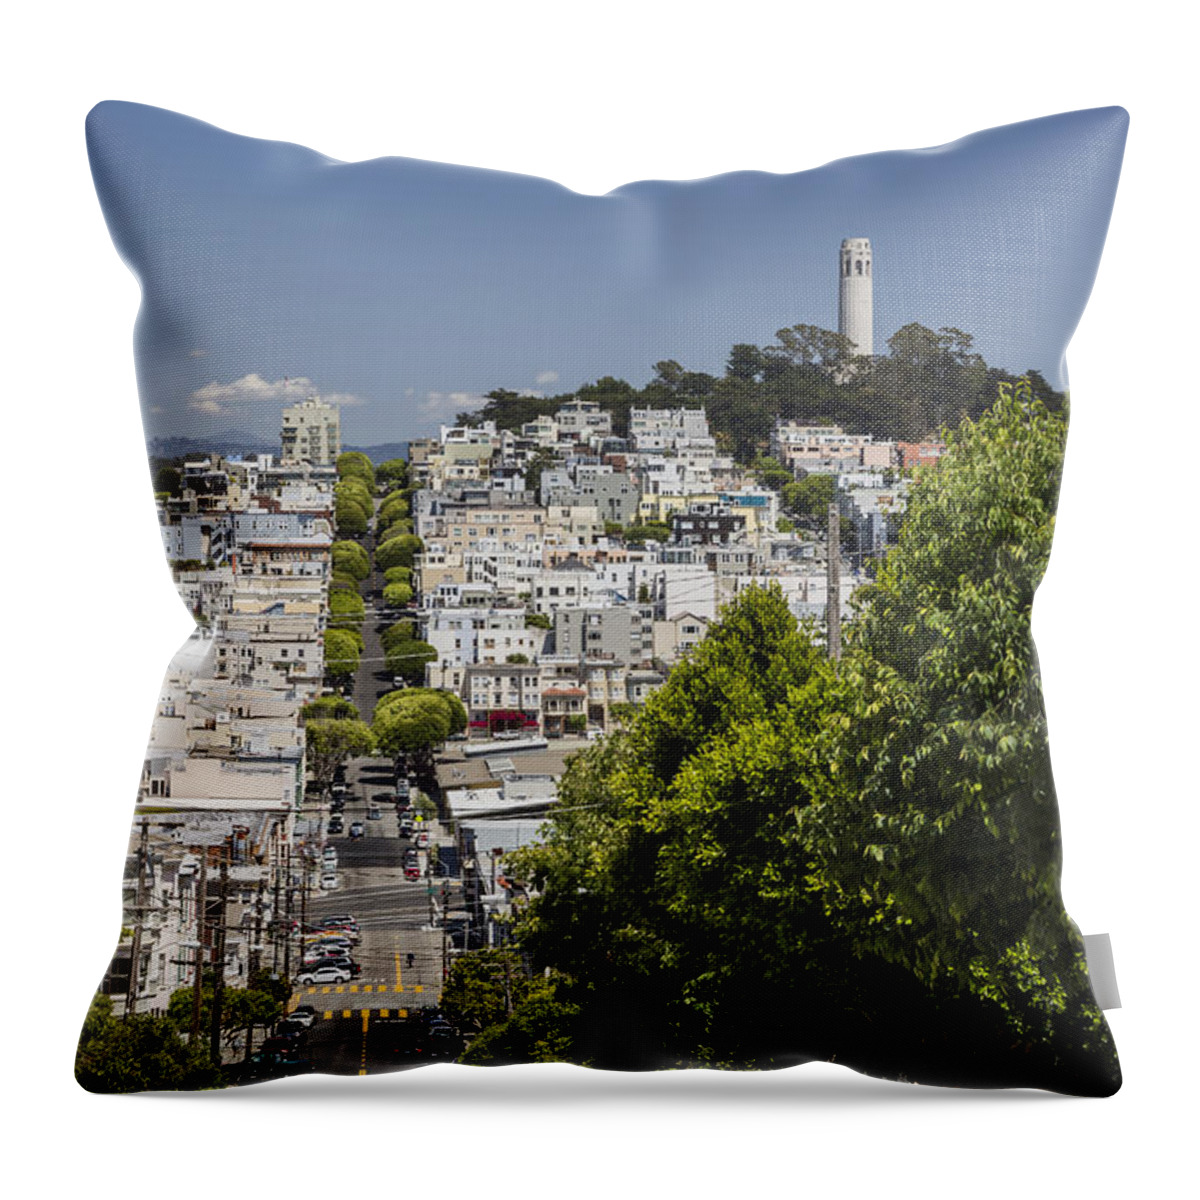 3scape Throw Pillow featuring the photograph Lombard Street and Coit Tower on Telegraph Hill by Adam Romanowicz